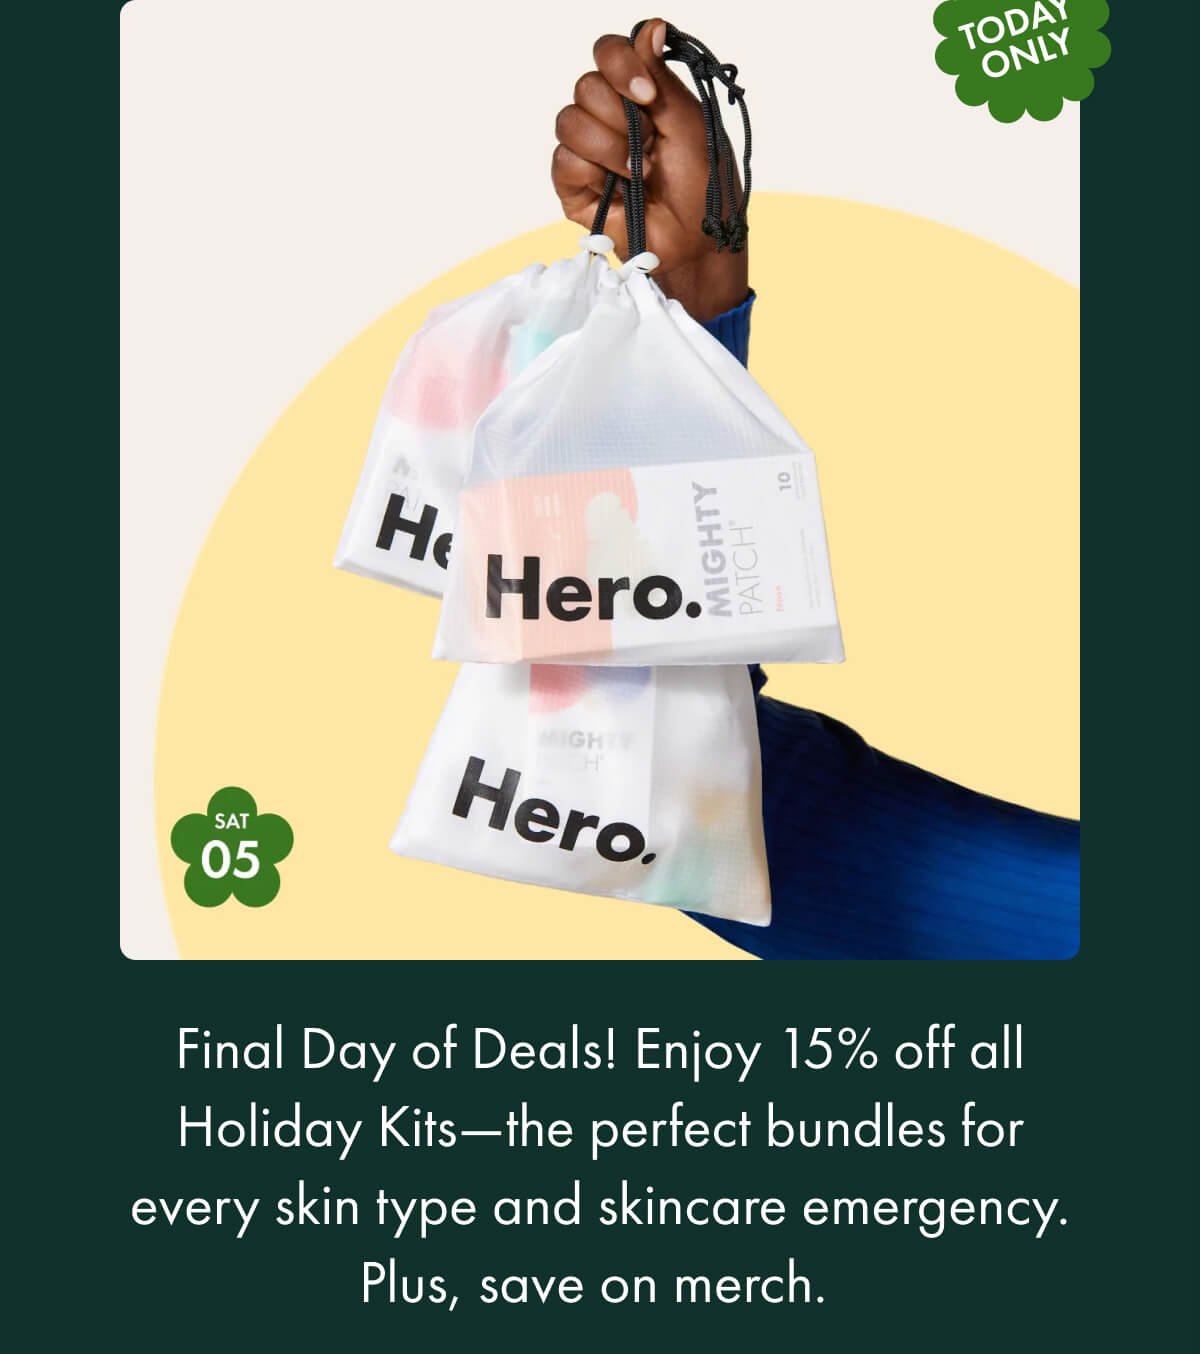 Final days of deals!  Enjoy 15% off all holiday kits...